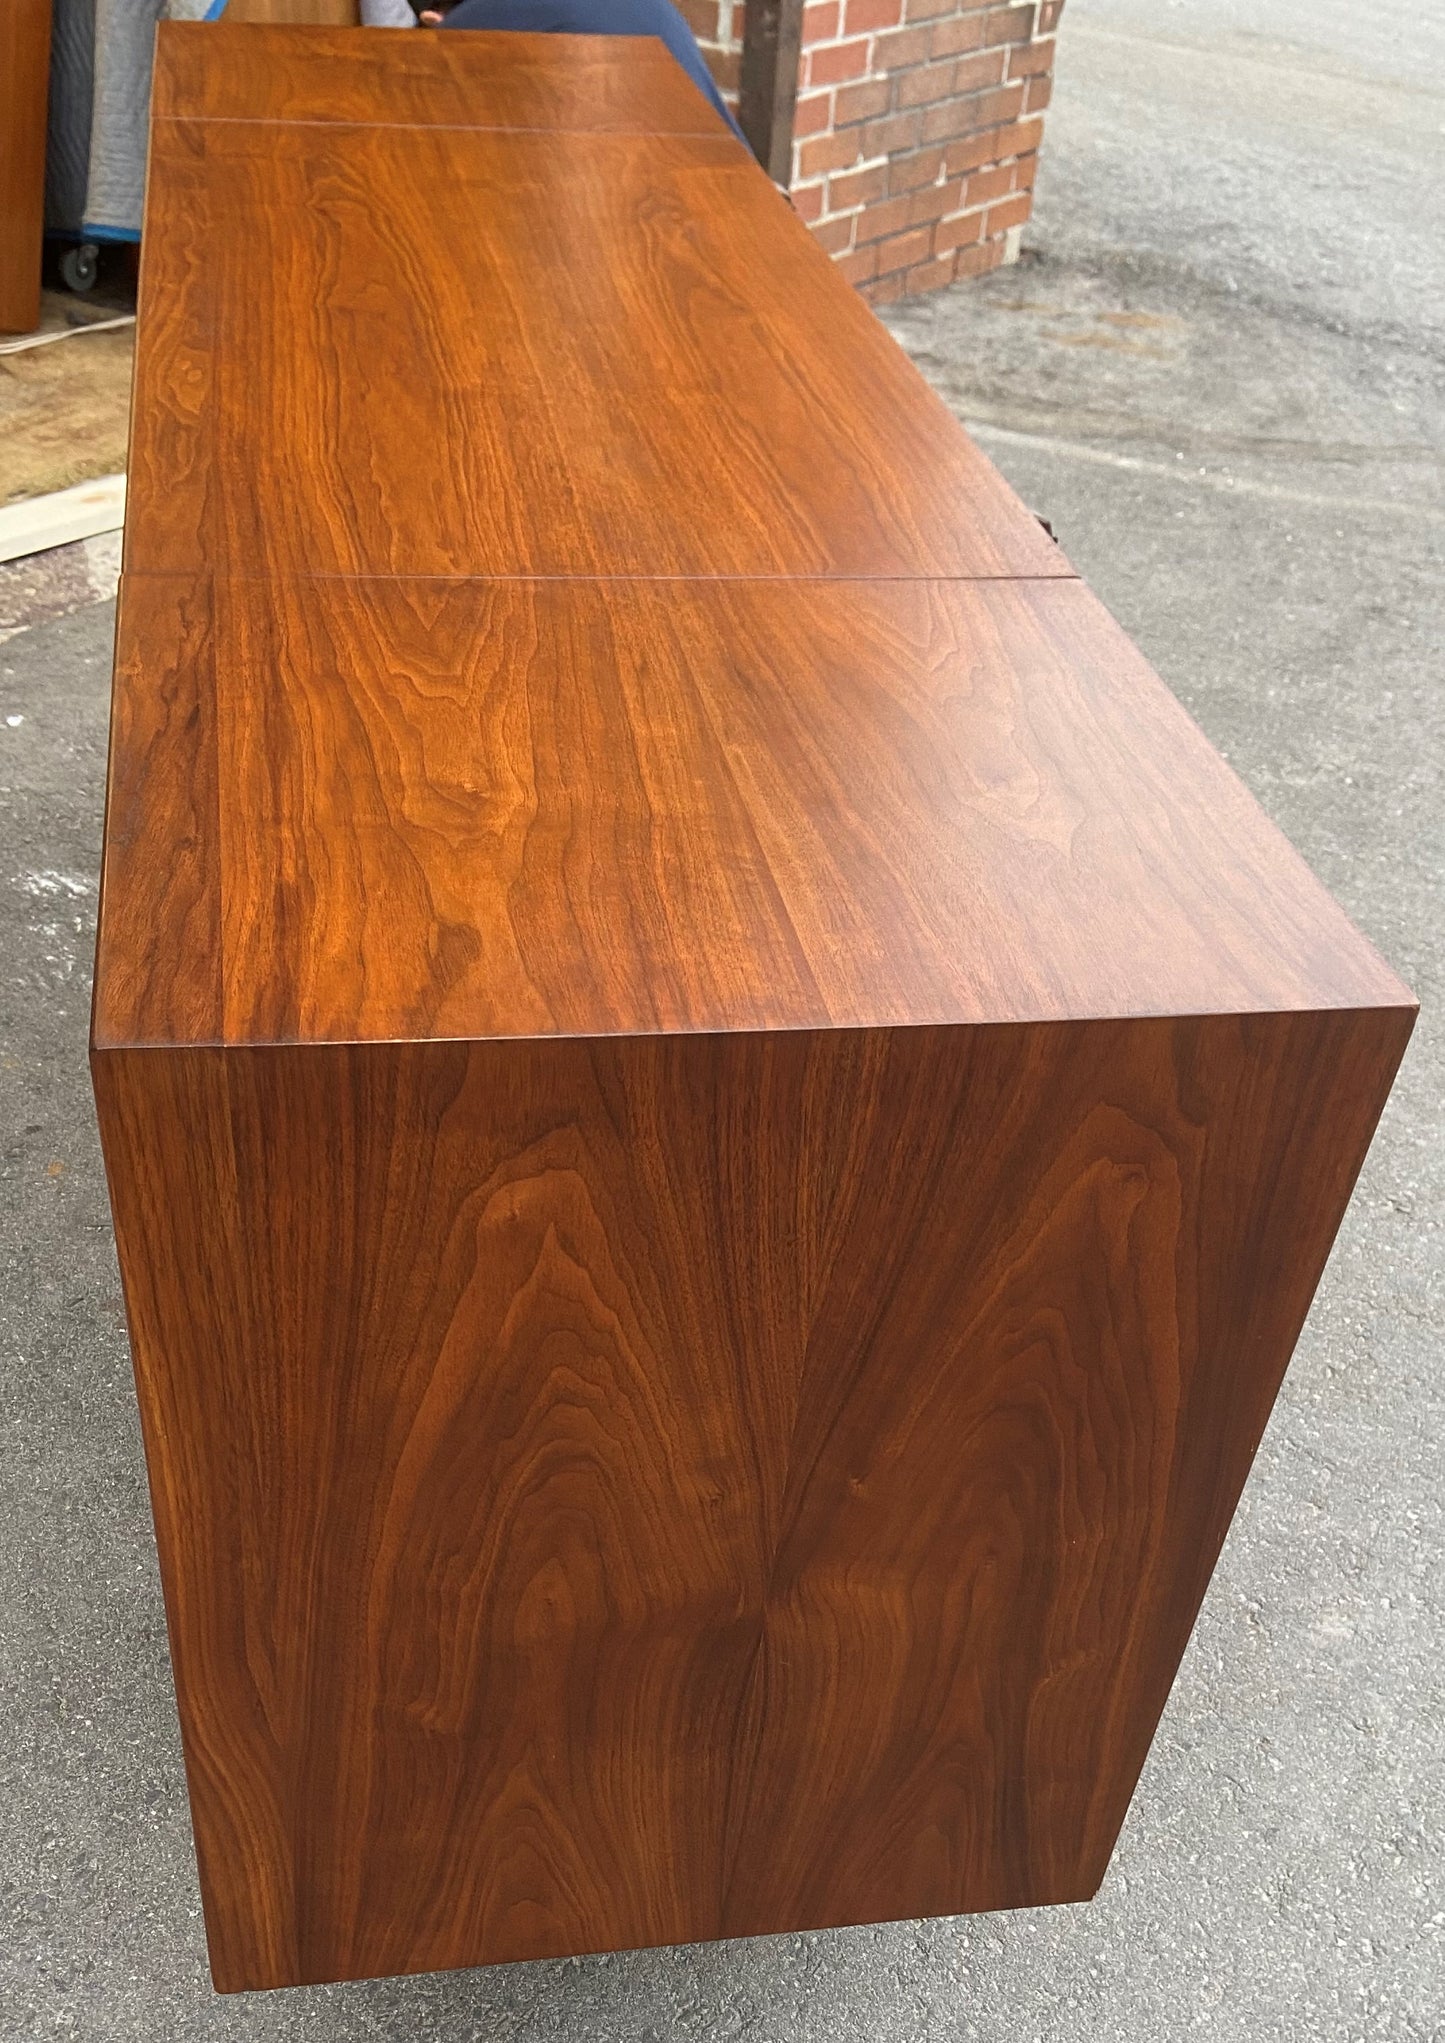 REFINISHED MCM Walnut Stereo Media Record Player Console , PERFECT